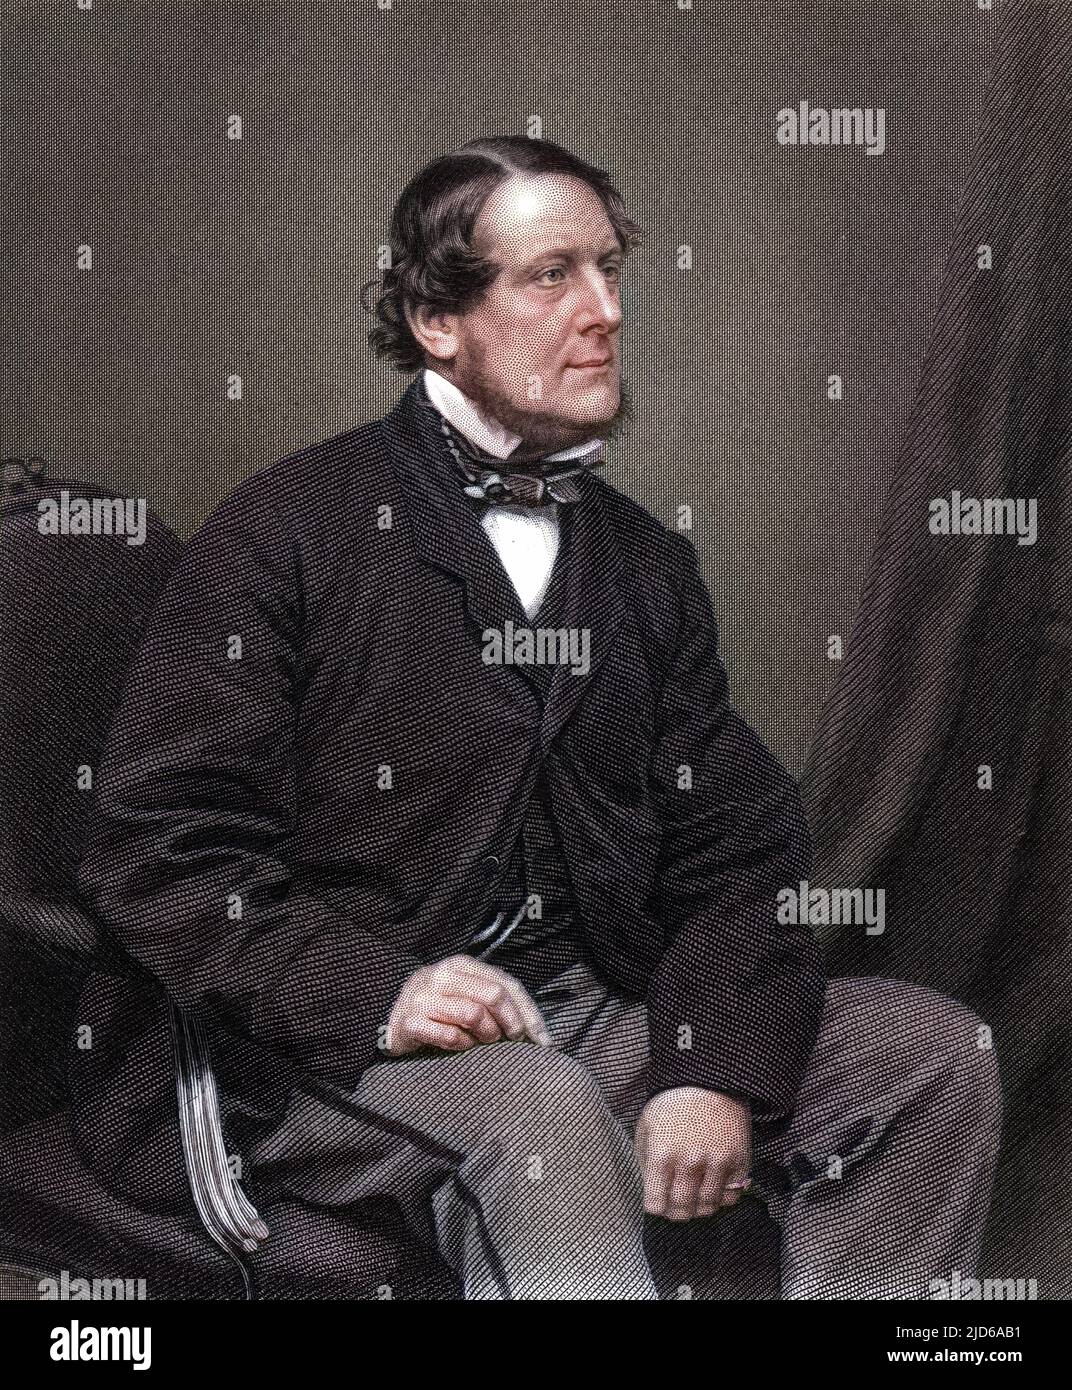 WILLIAM HENRY, lord LEIGH Lord-lieutenant of the county of Warwick Colourised version of : 10163023       Date: 1824 - 1905 Stock Photo